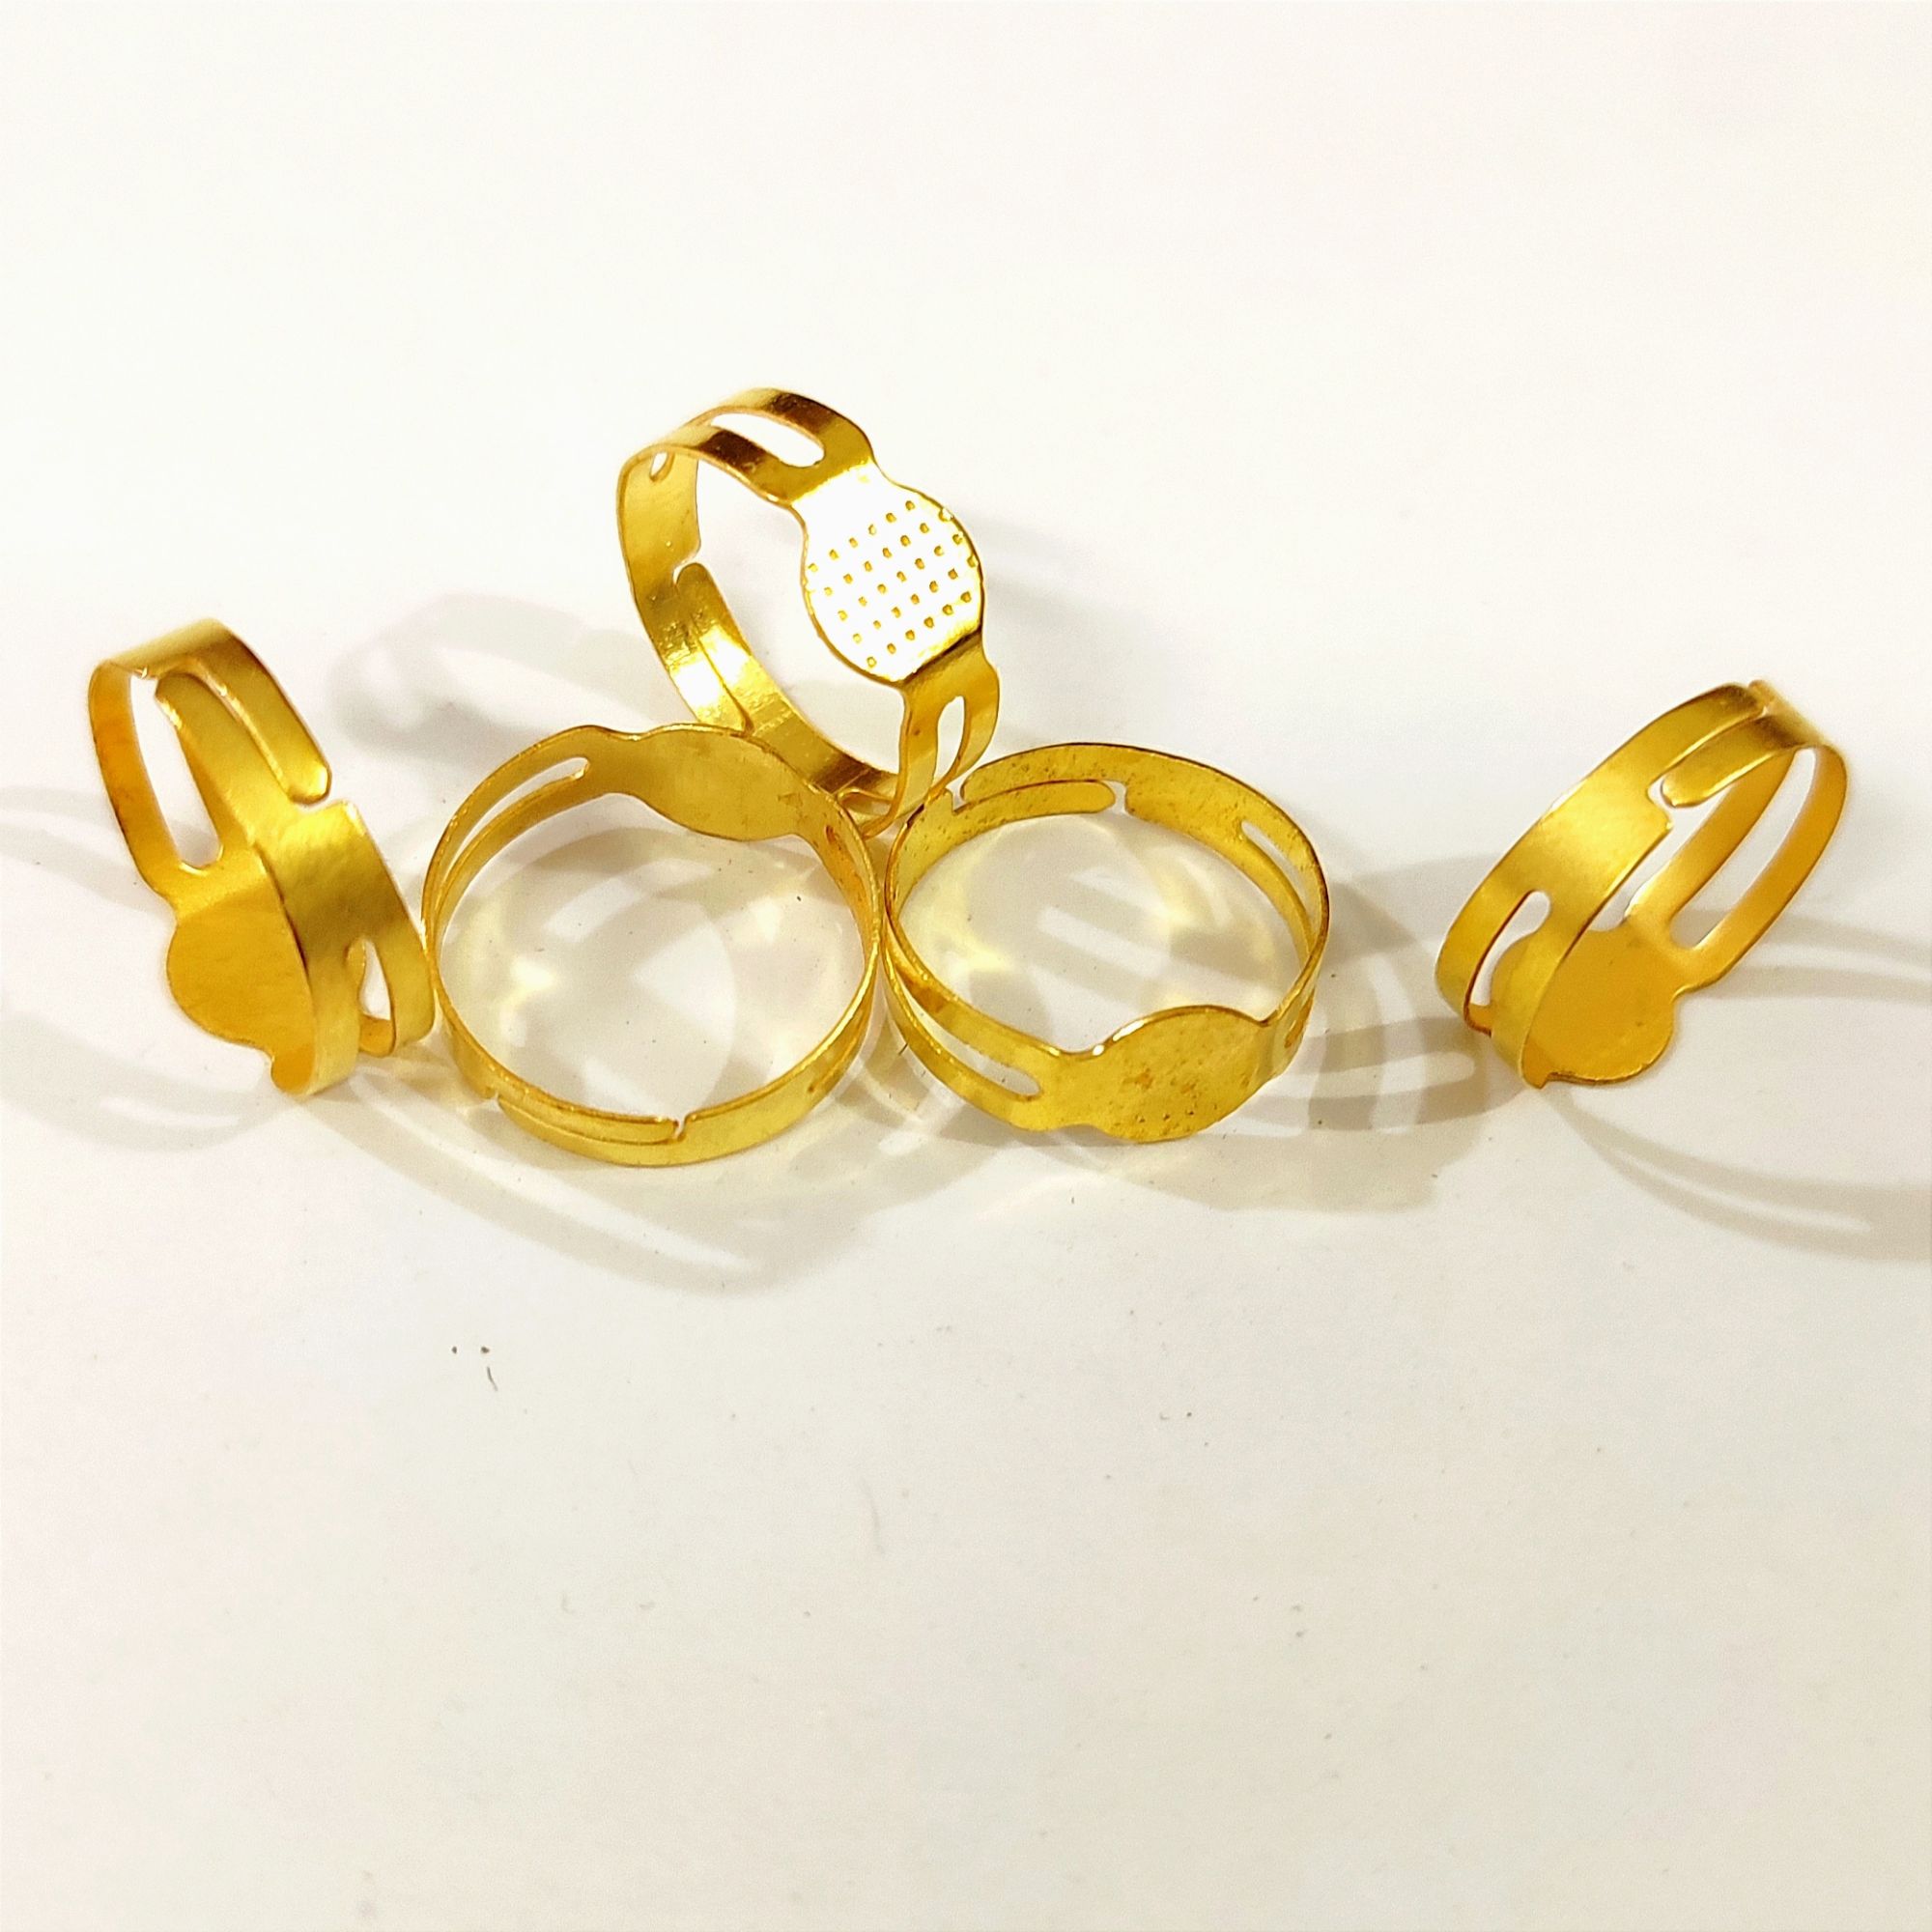 20 Pcs Metal Ring Golden Colour For Resin Art And Craft